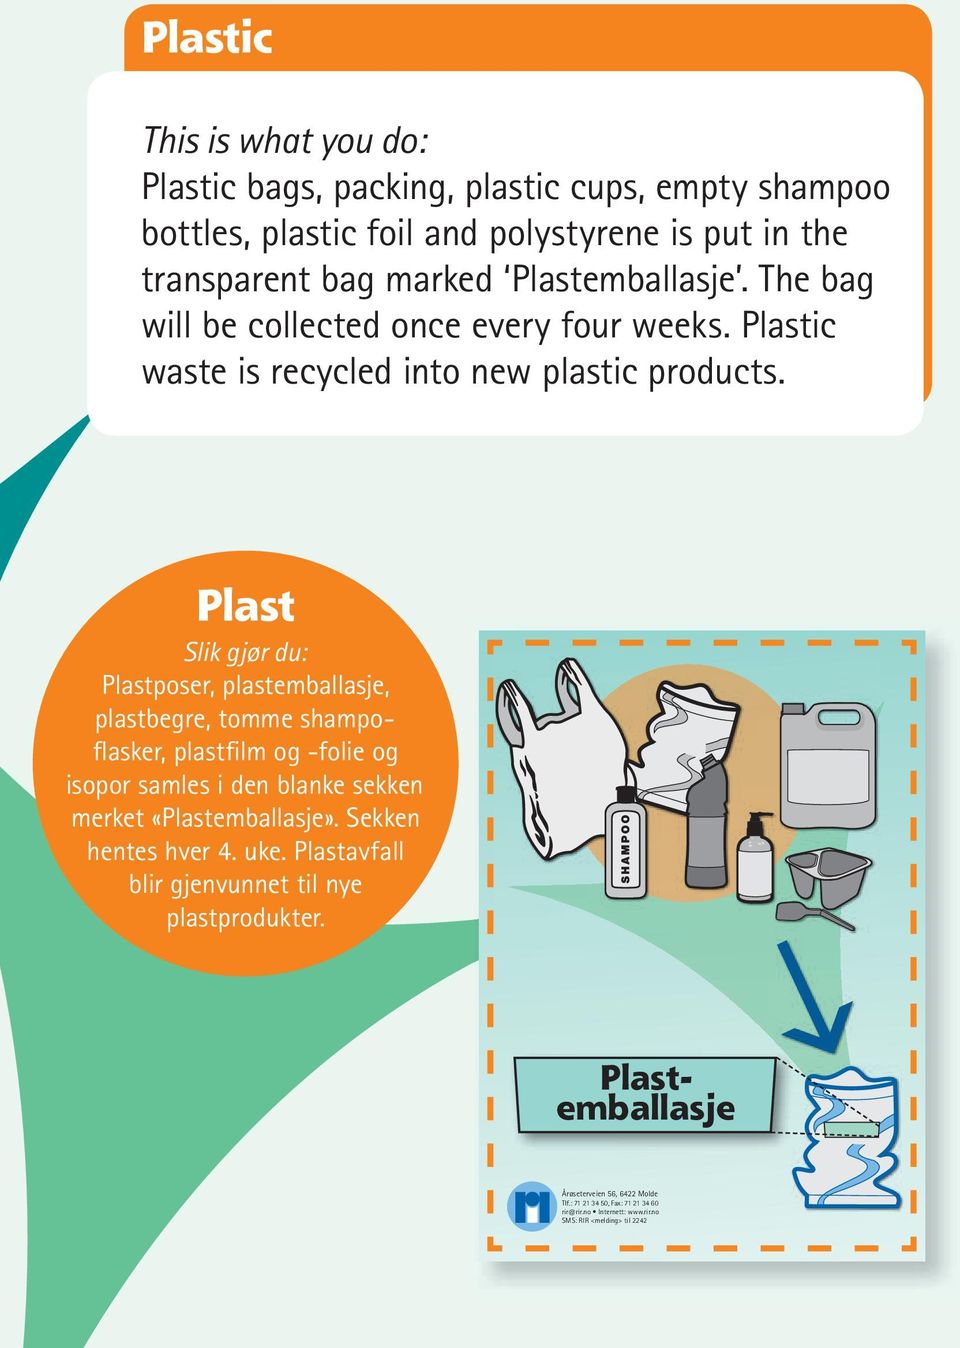 Plastic waste is recycled into new plastic products.